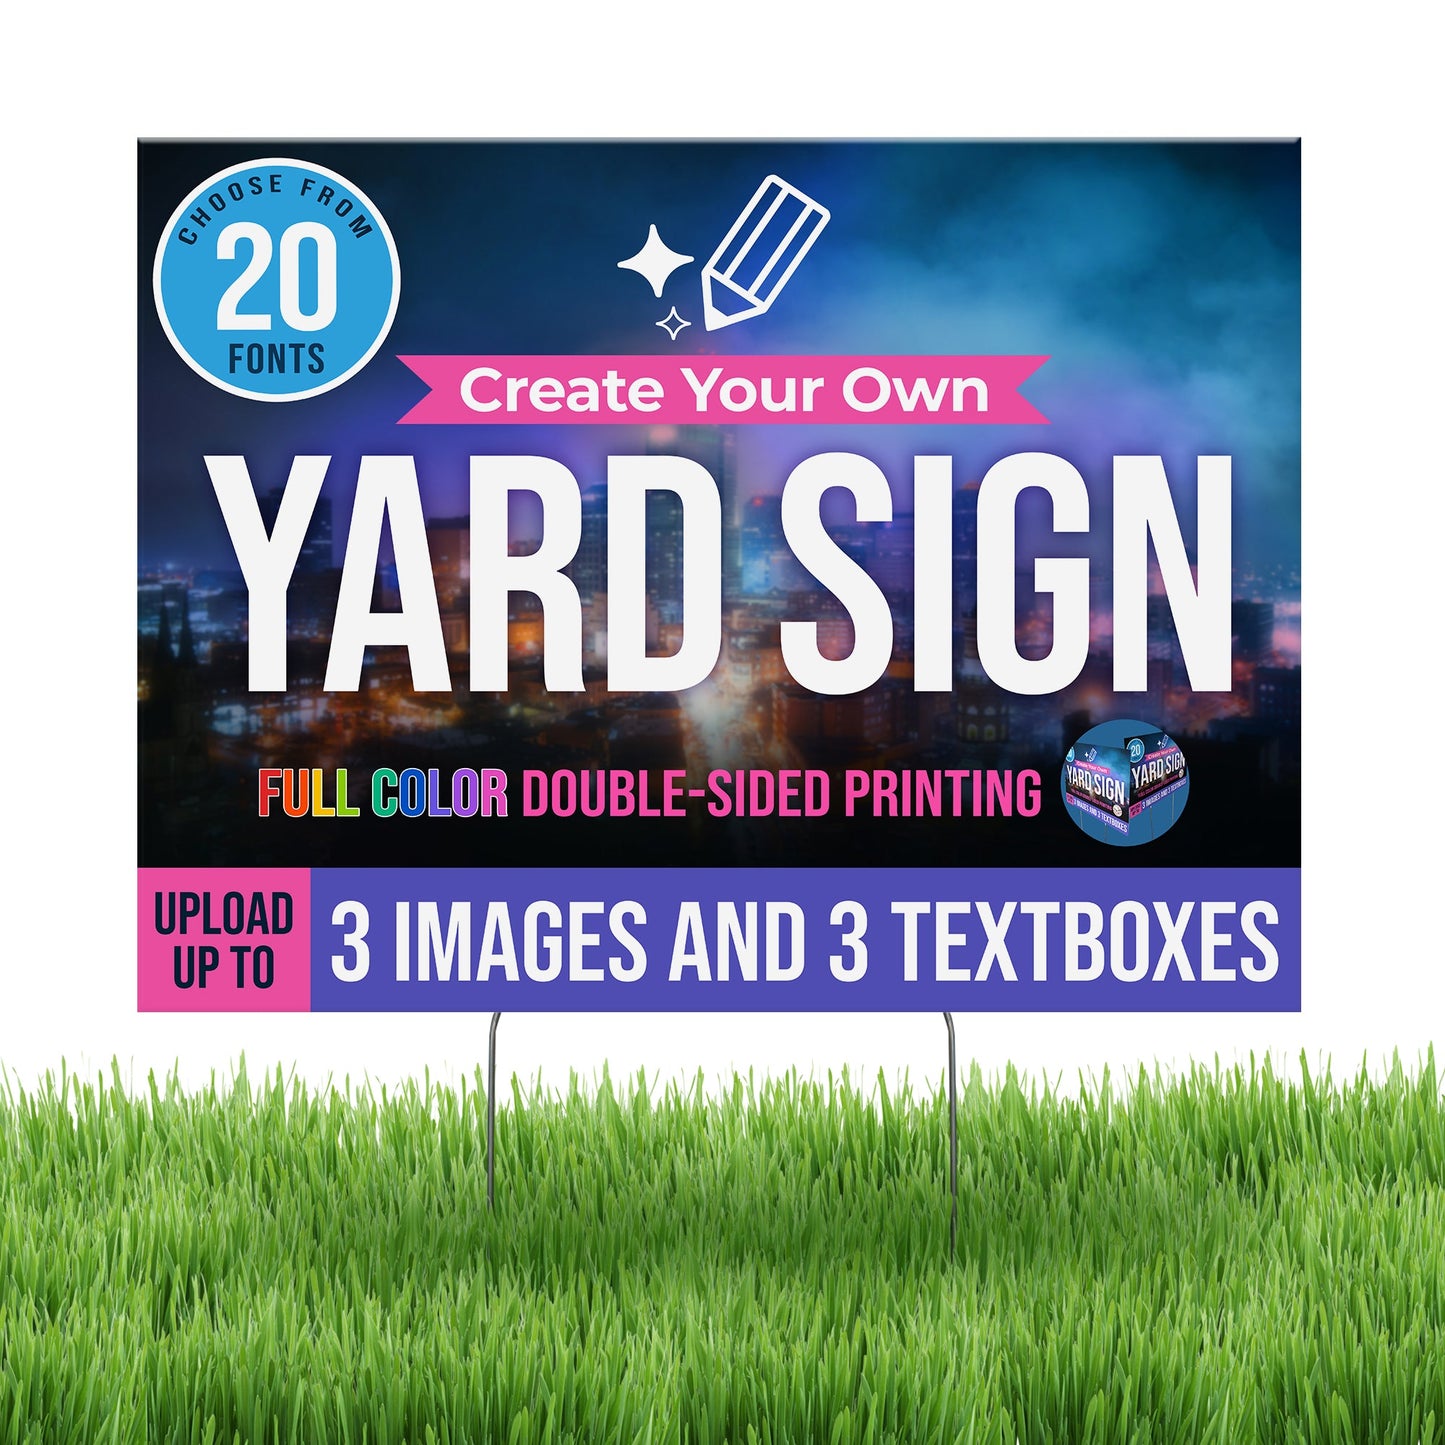 WHOLESALE Personalized Corrugated Plastic Full Color Yard Signs for Outdoors, Home, Office, Business - 24"x18" FOR PICK UP ONLY